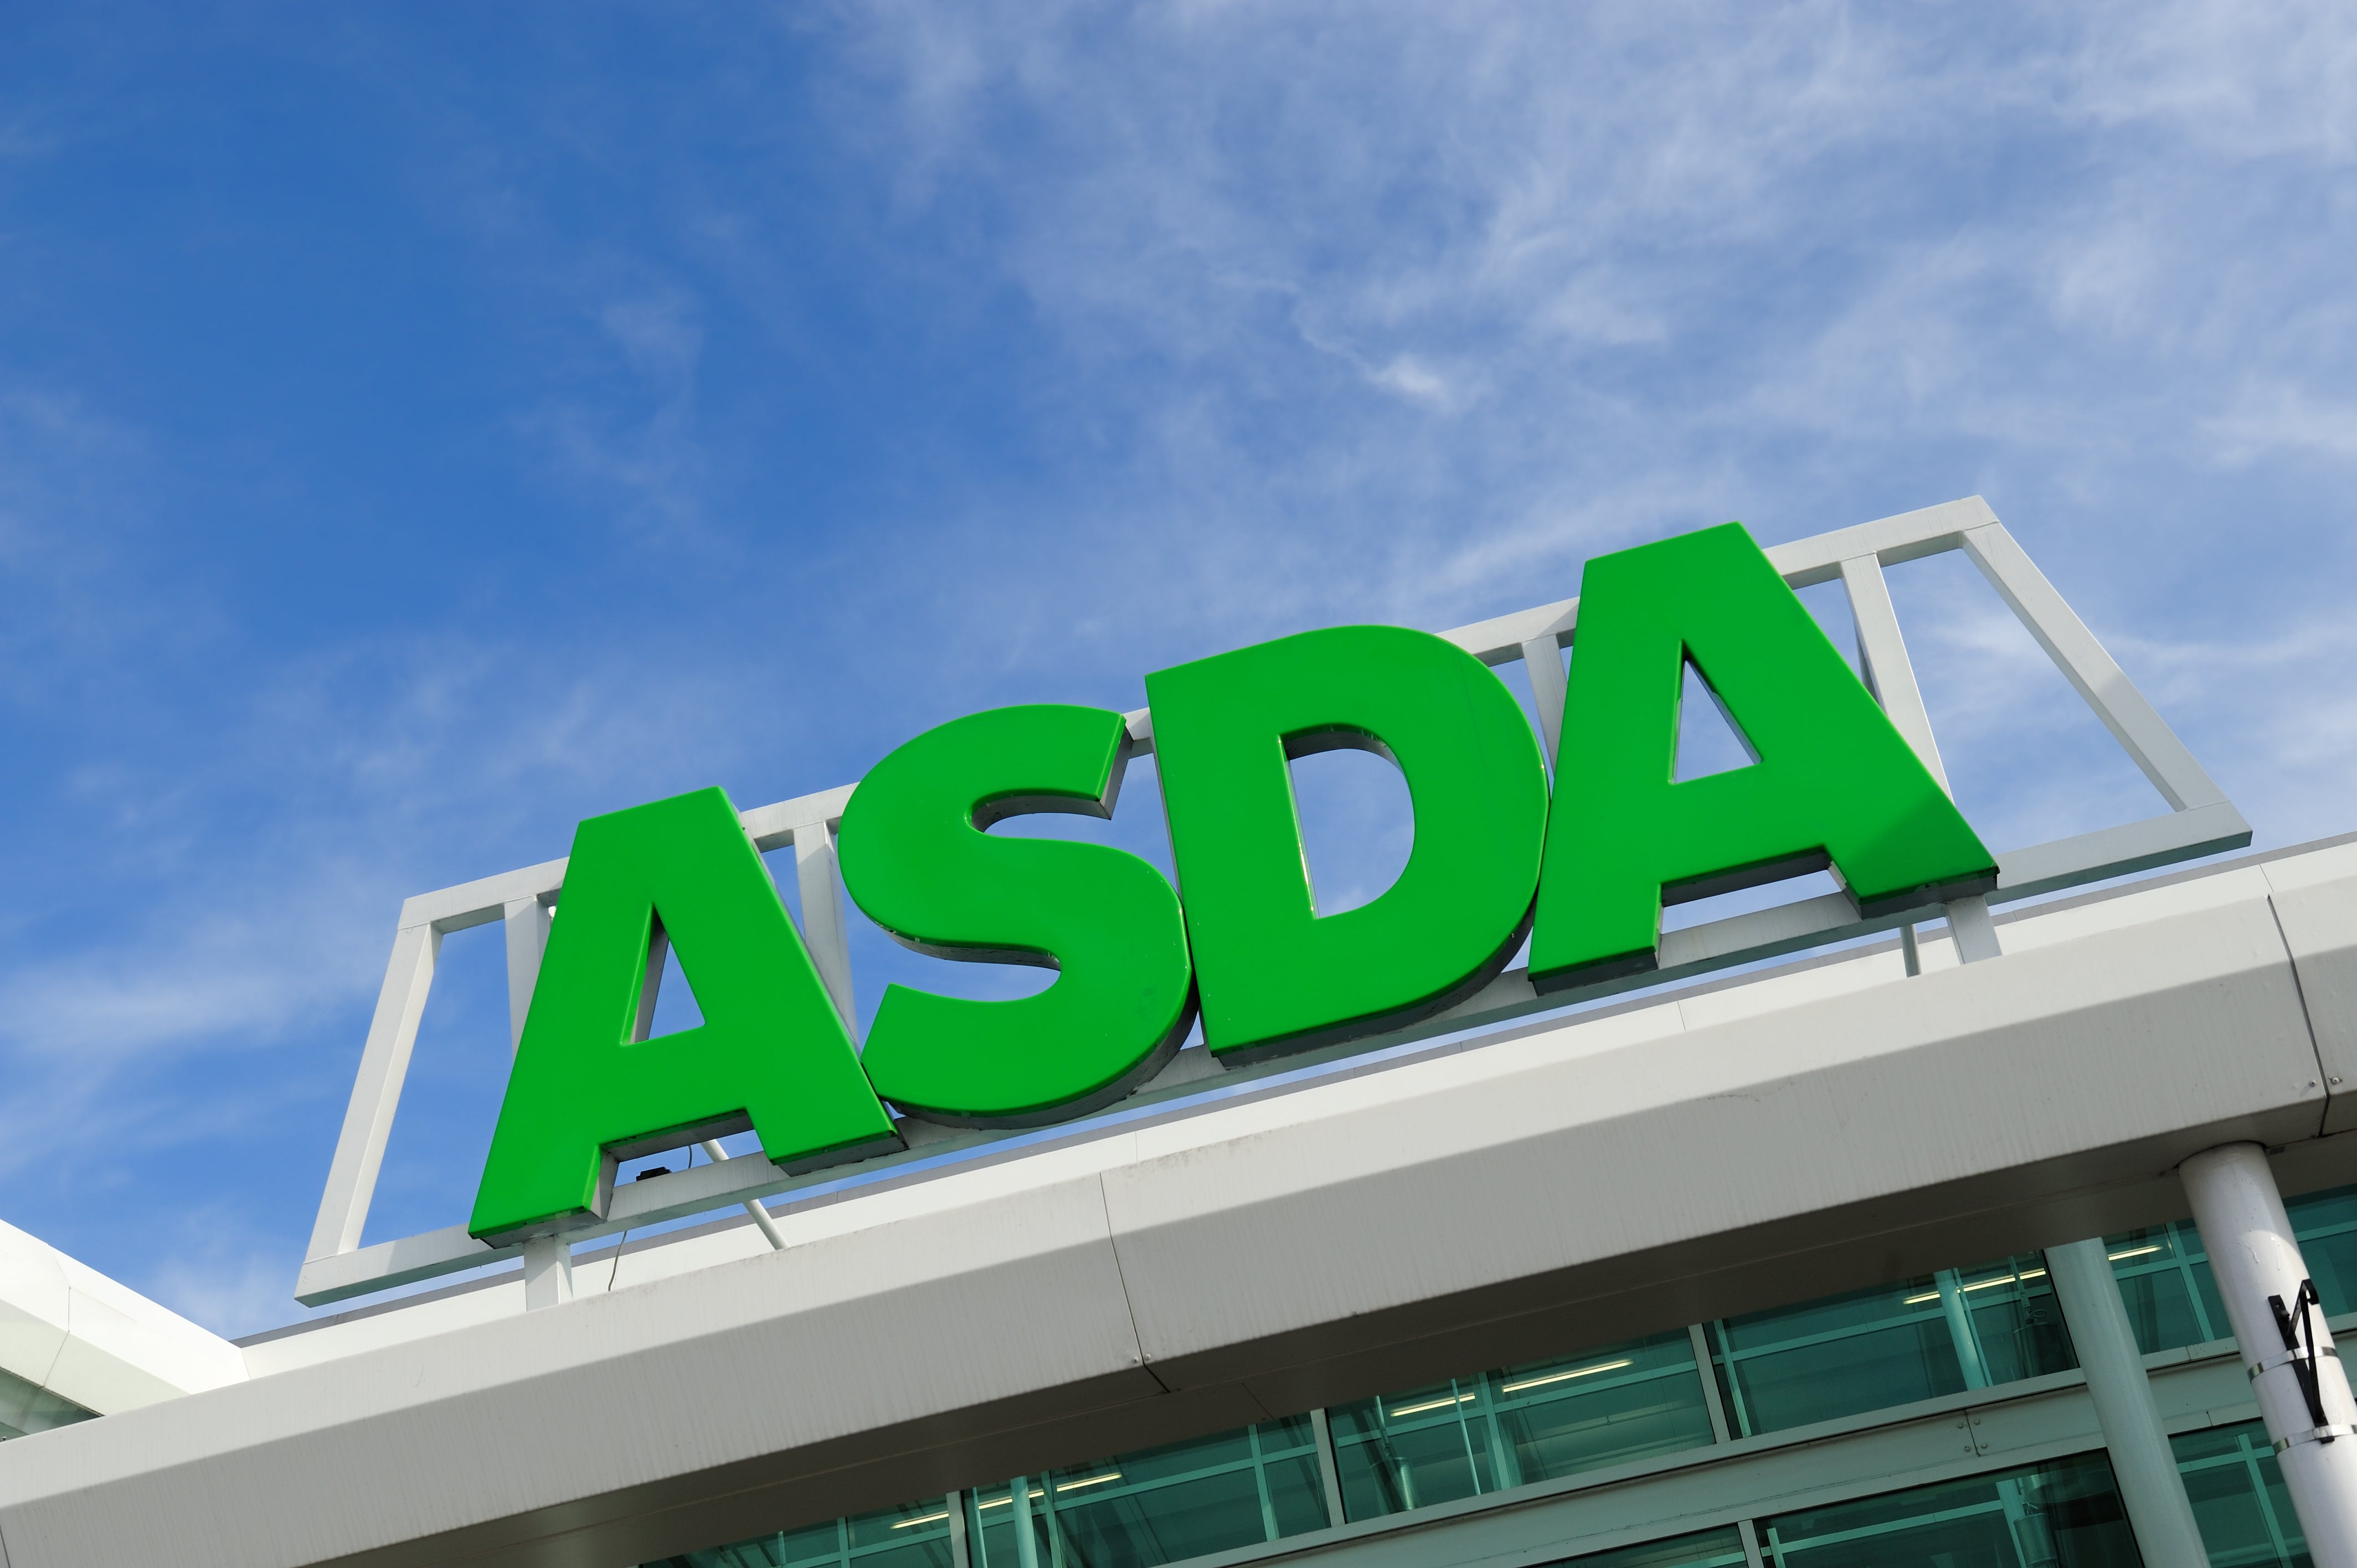 A former Asda worker has won an age discrimination case against the supermarket